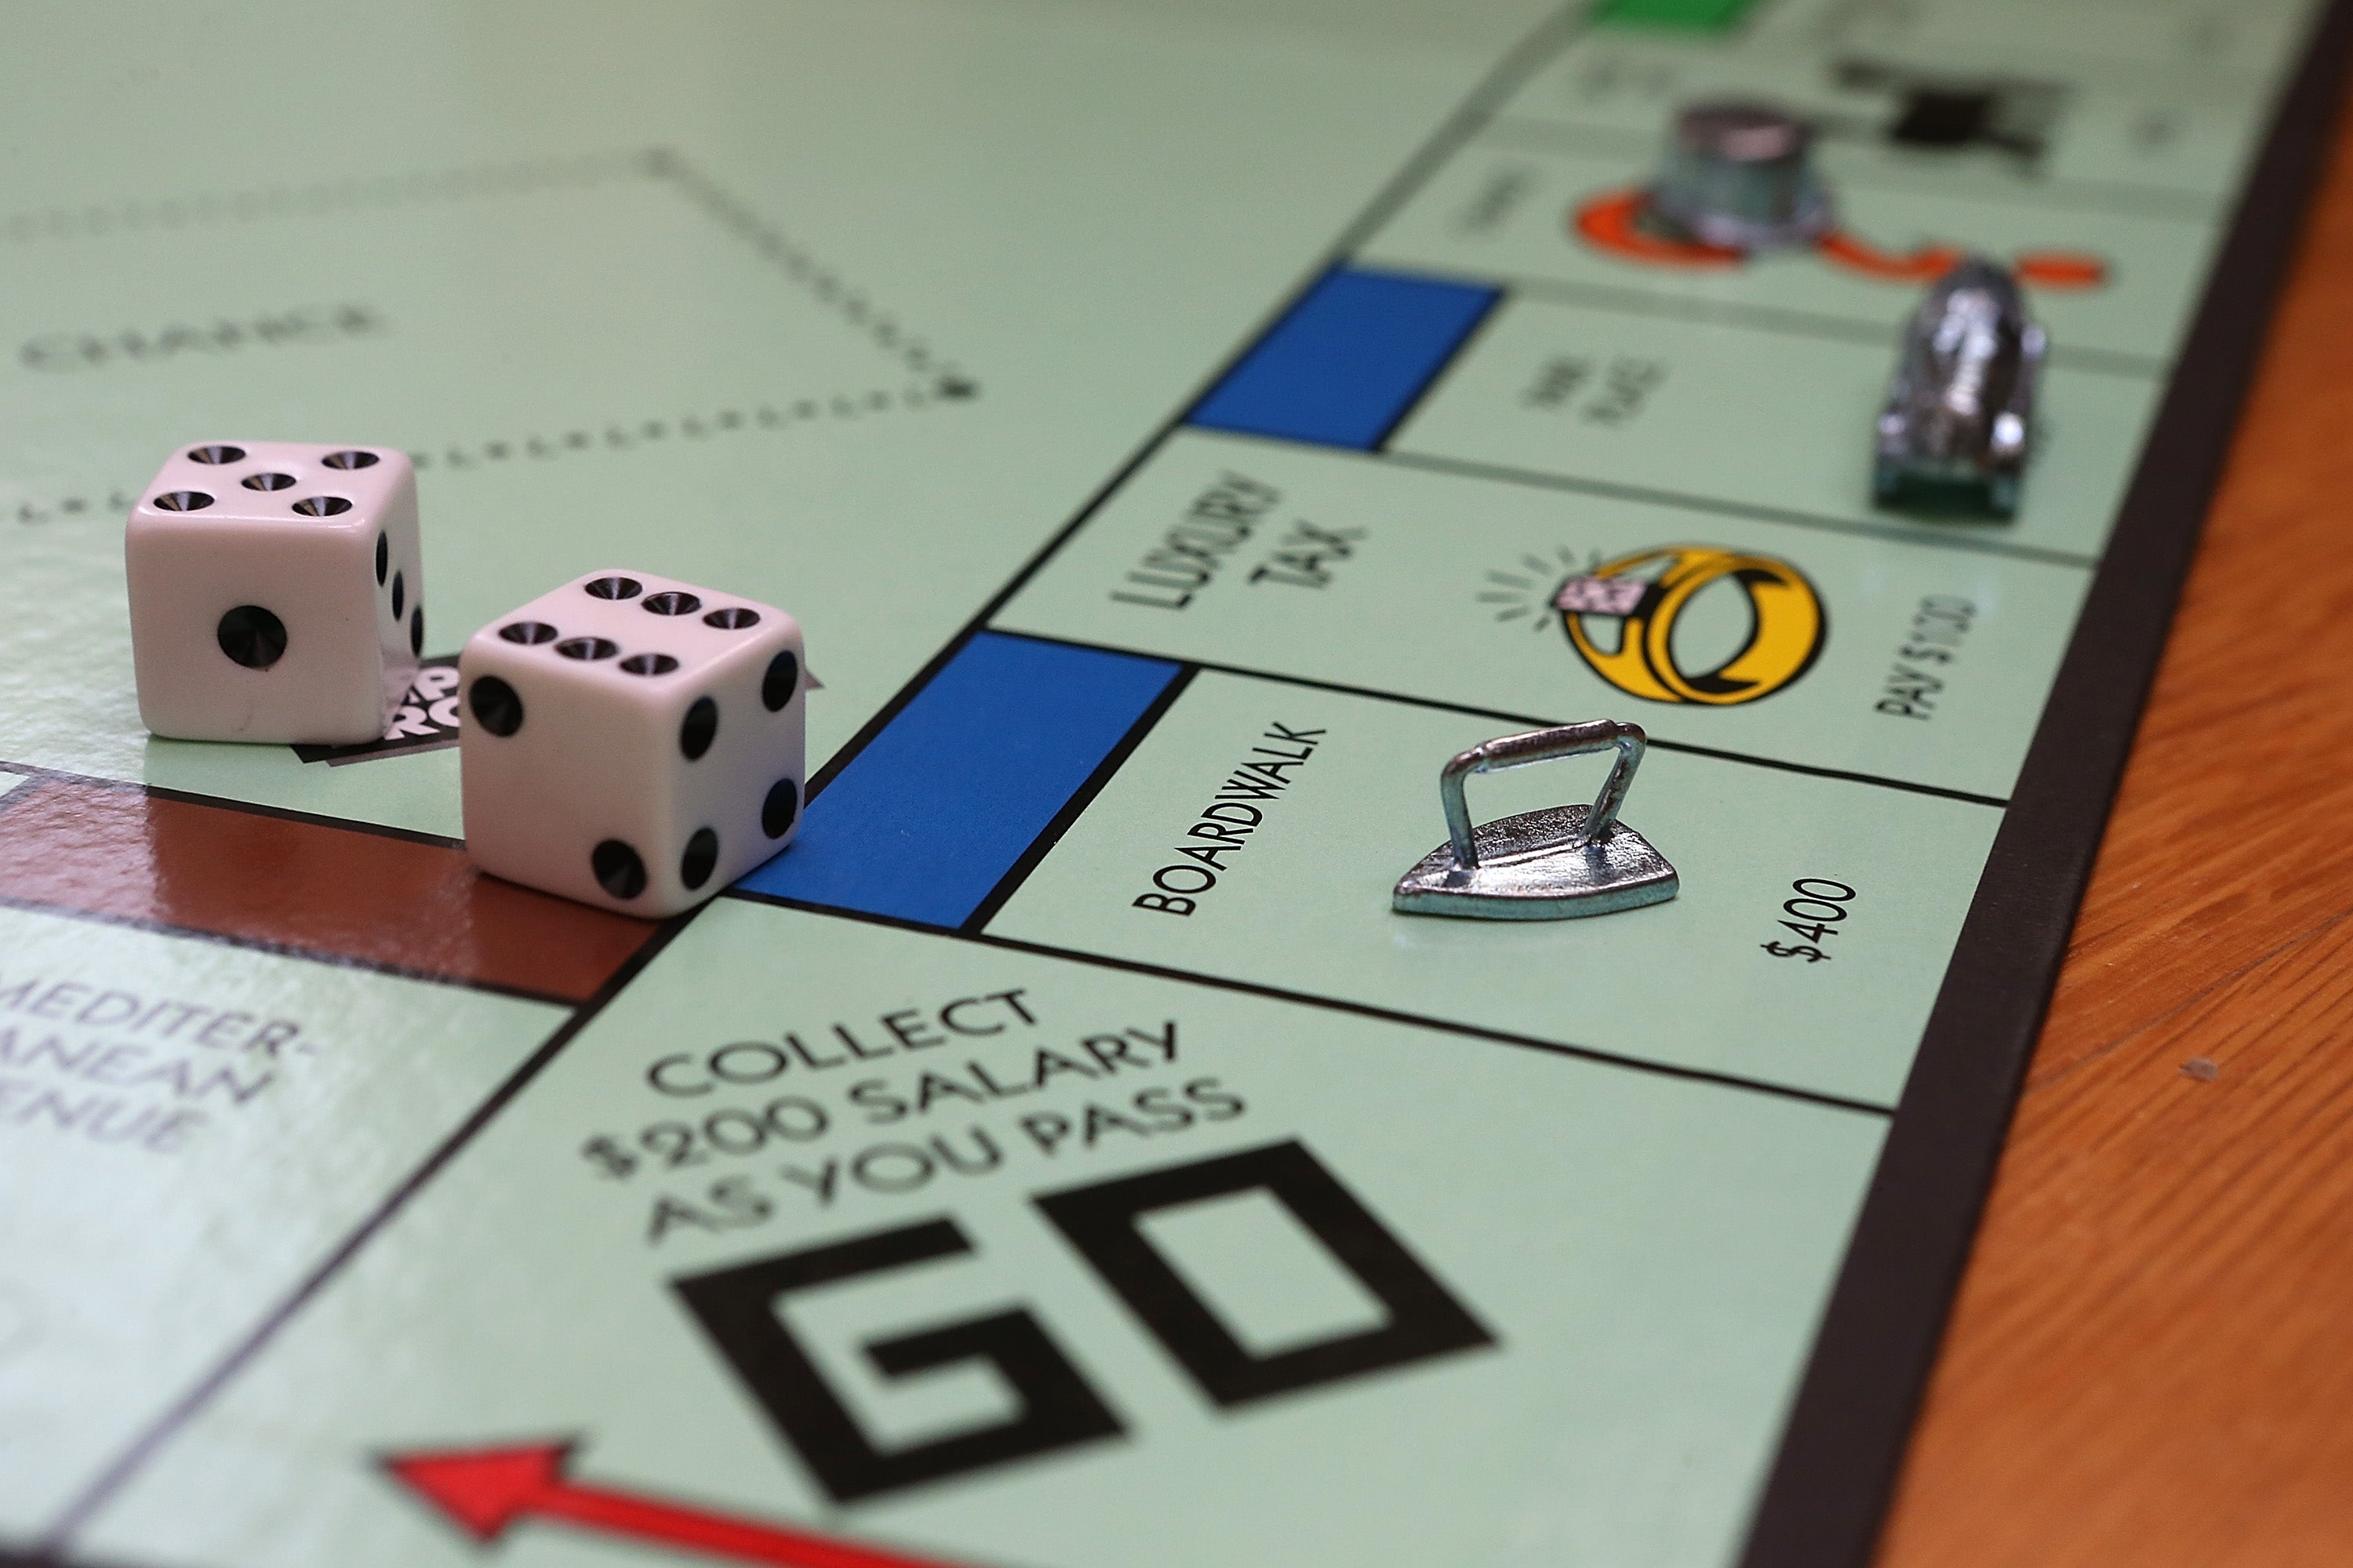 Board games have long been seen as a cause of tension at gatherings, or as simply a bit naff